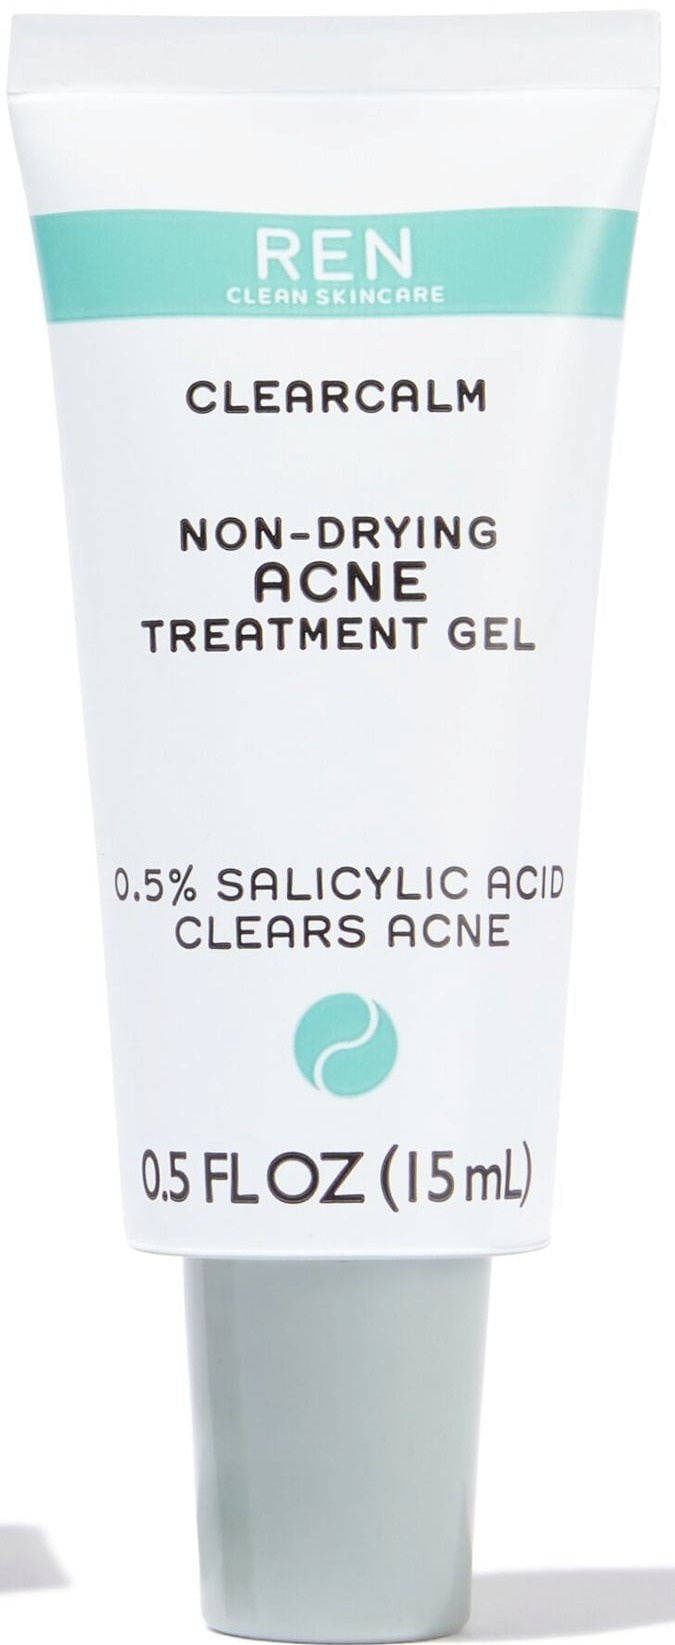 REN Clean Skincare Clearcalm Non-drying Spot Treatment